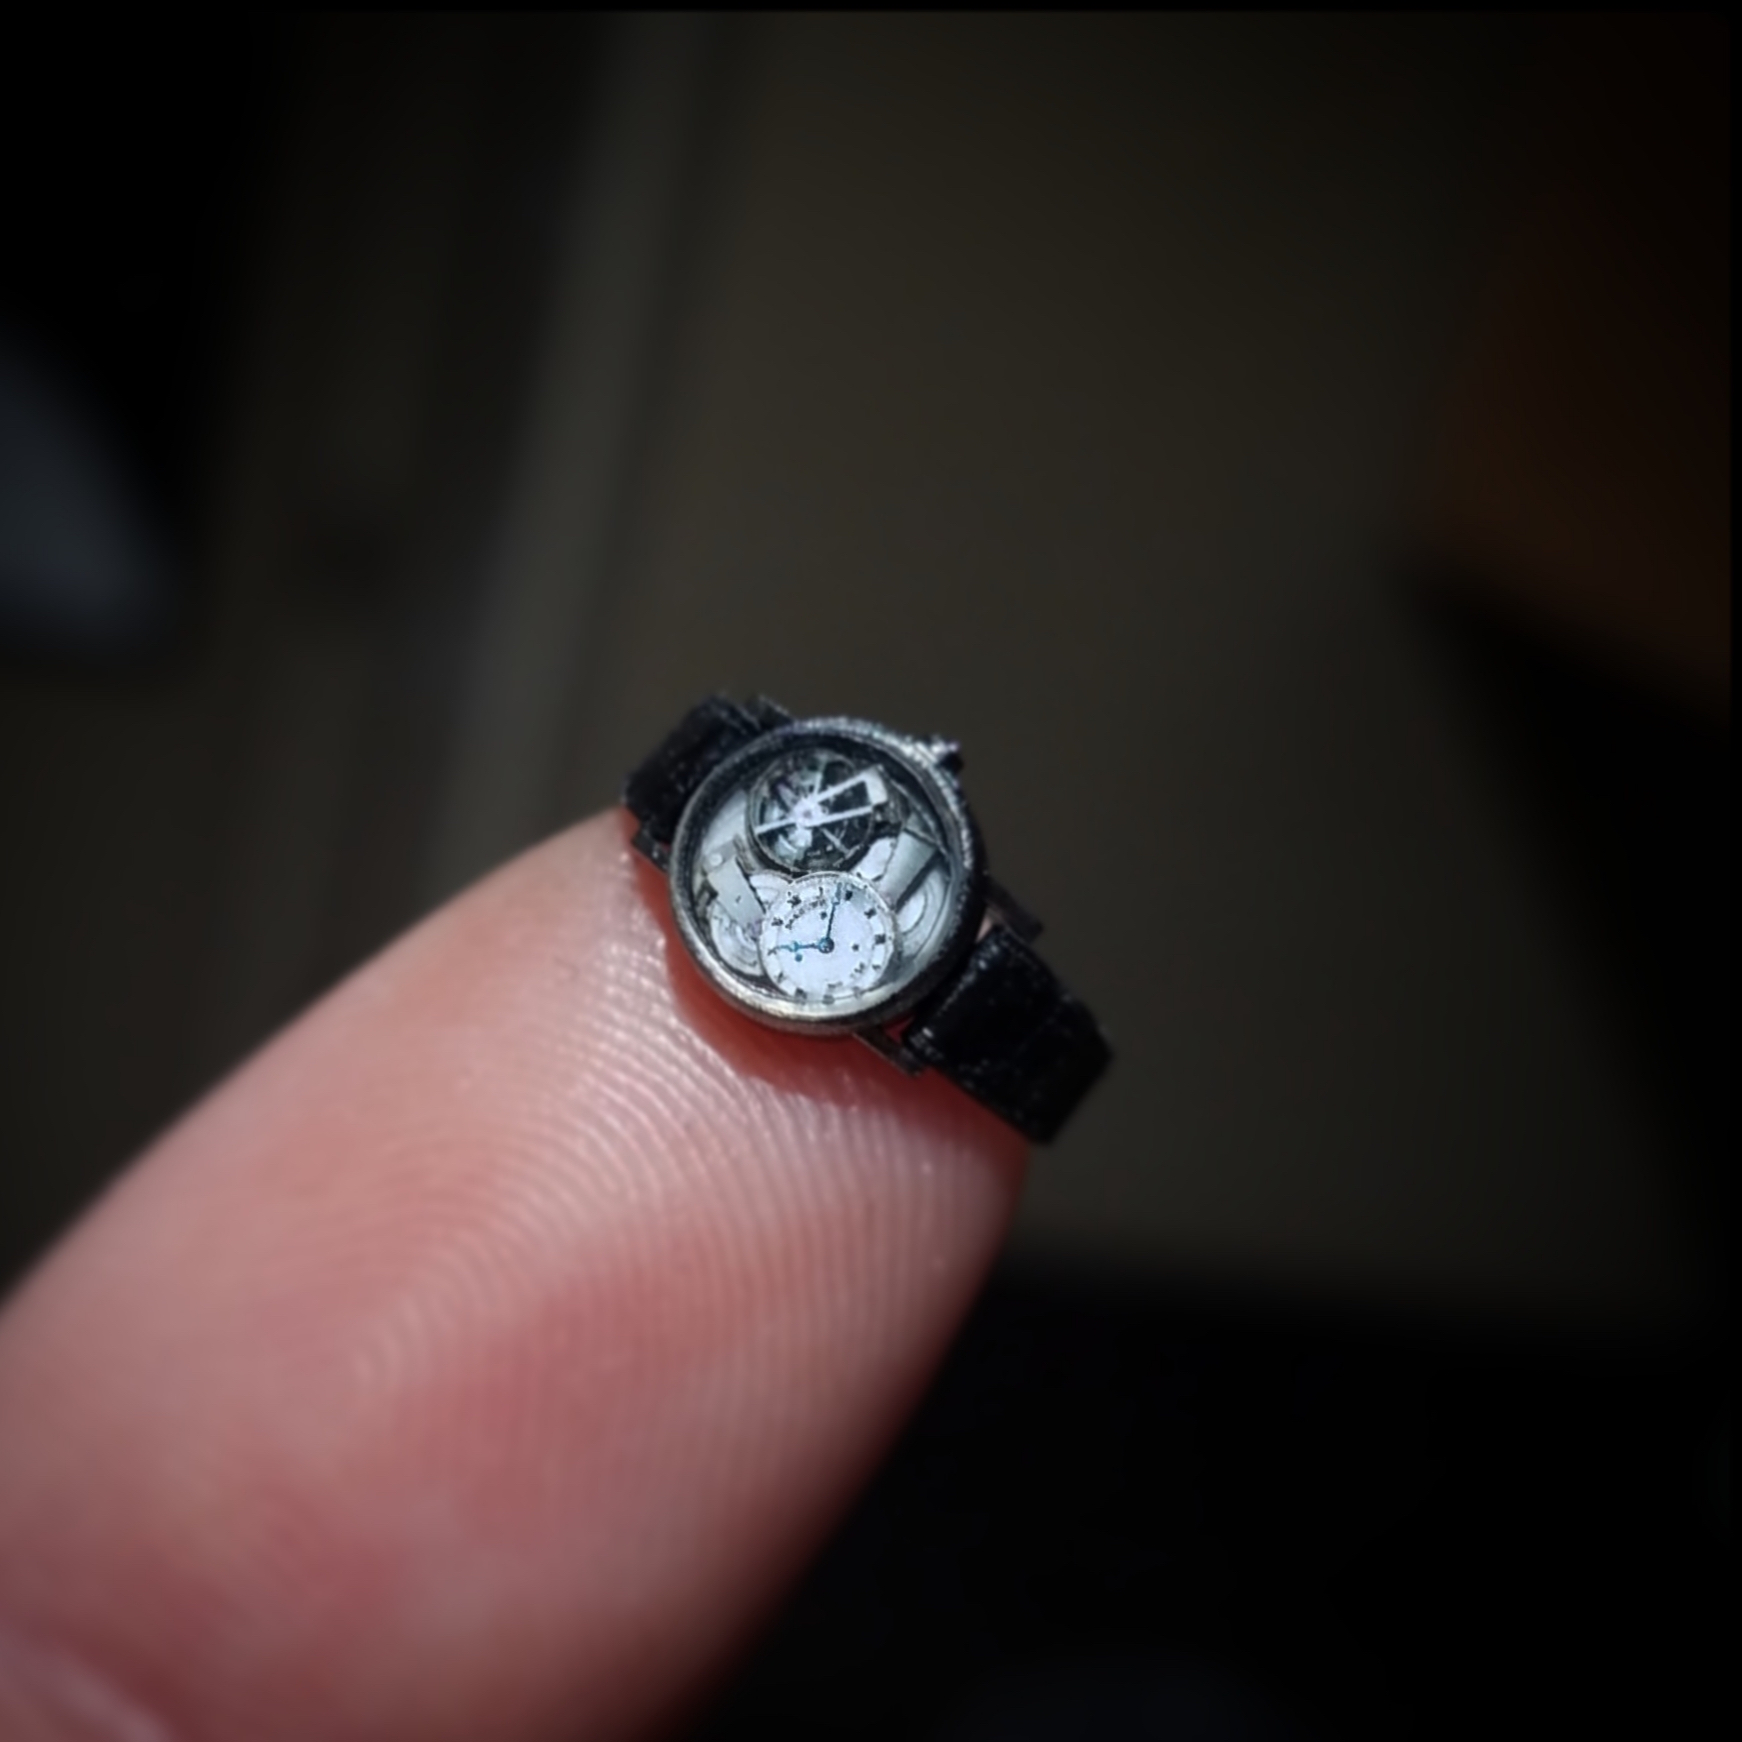 fingertip with tiny watch